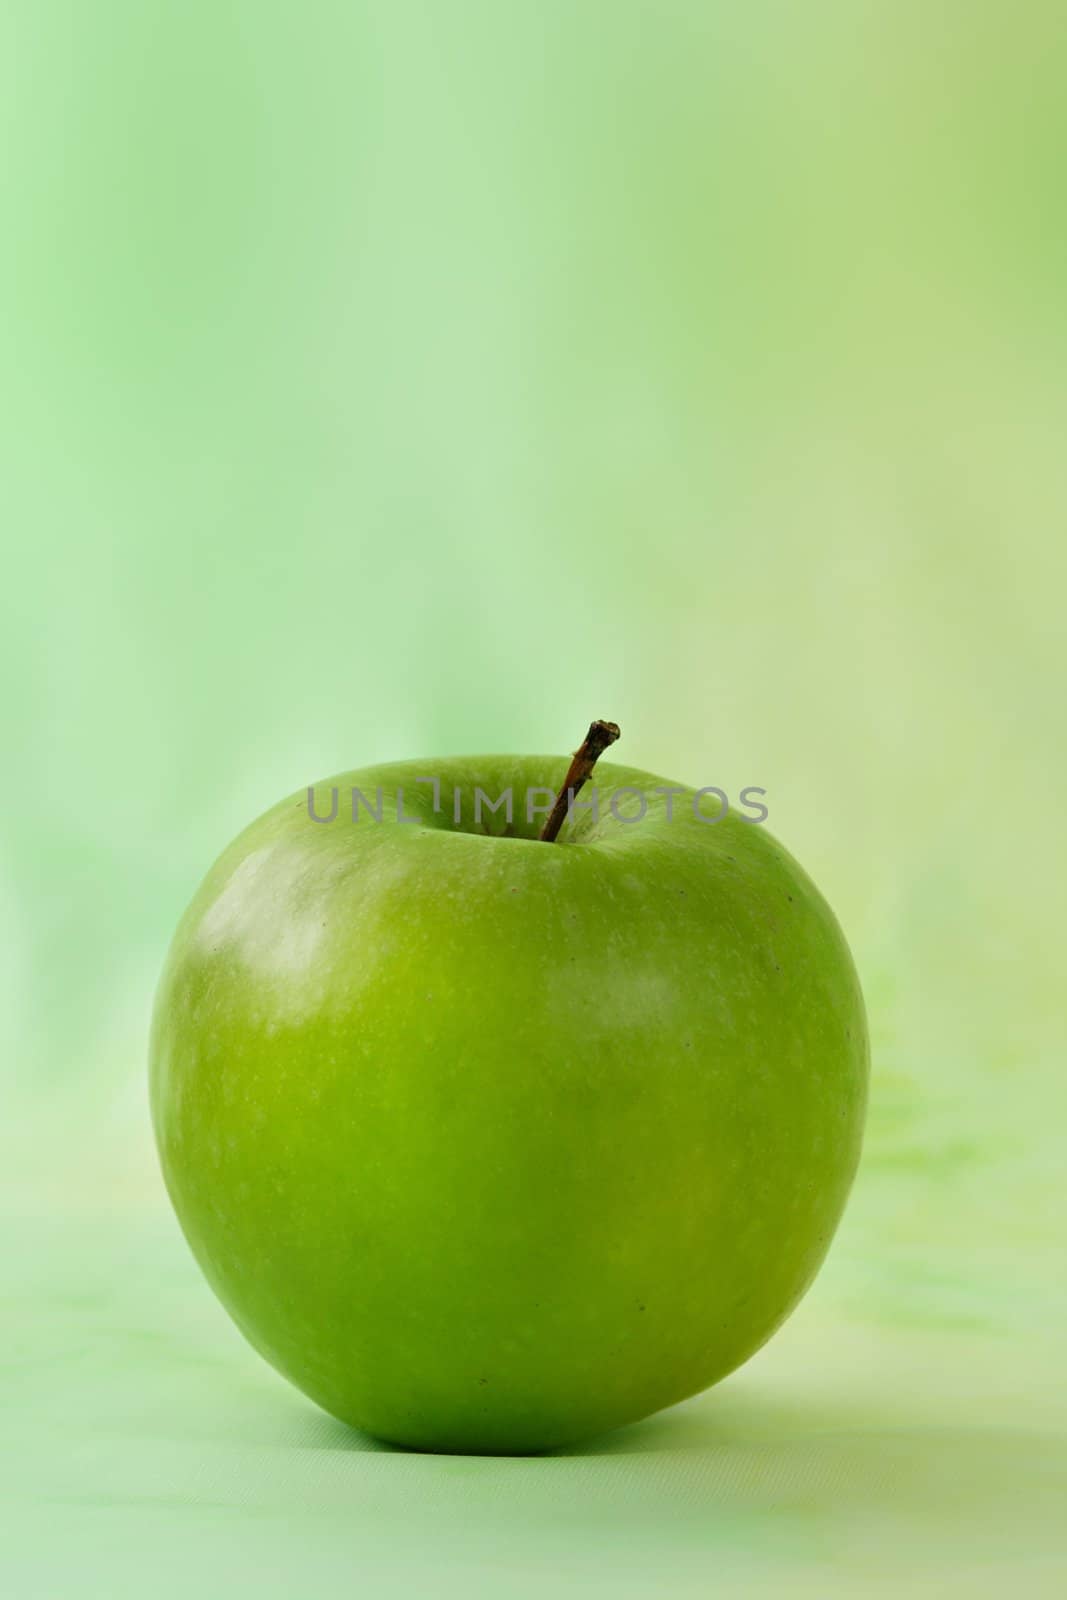 green apple by lanalanglois